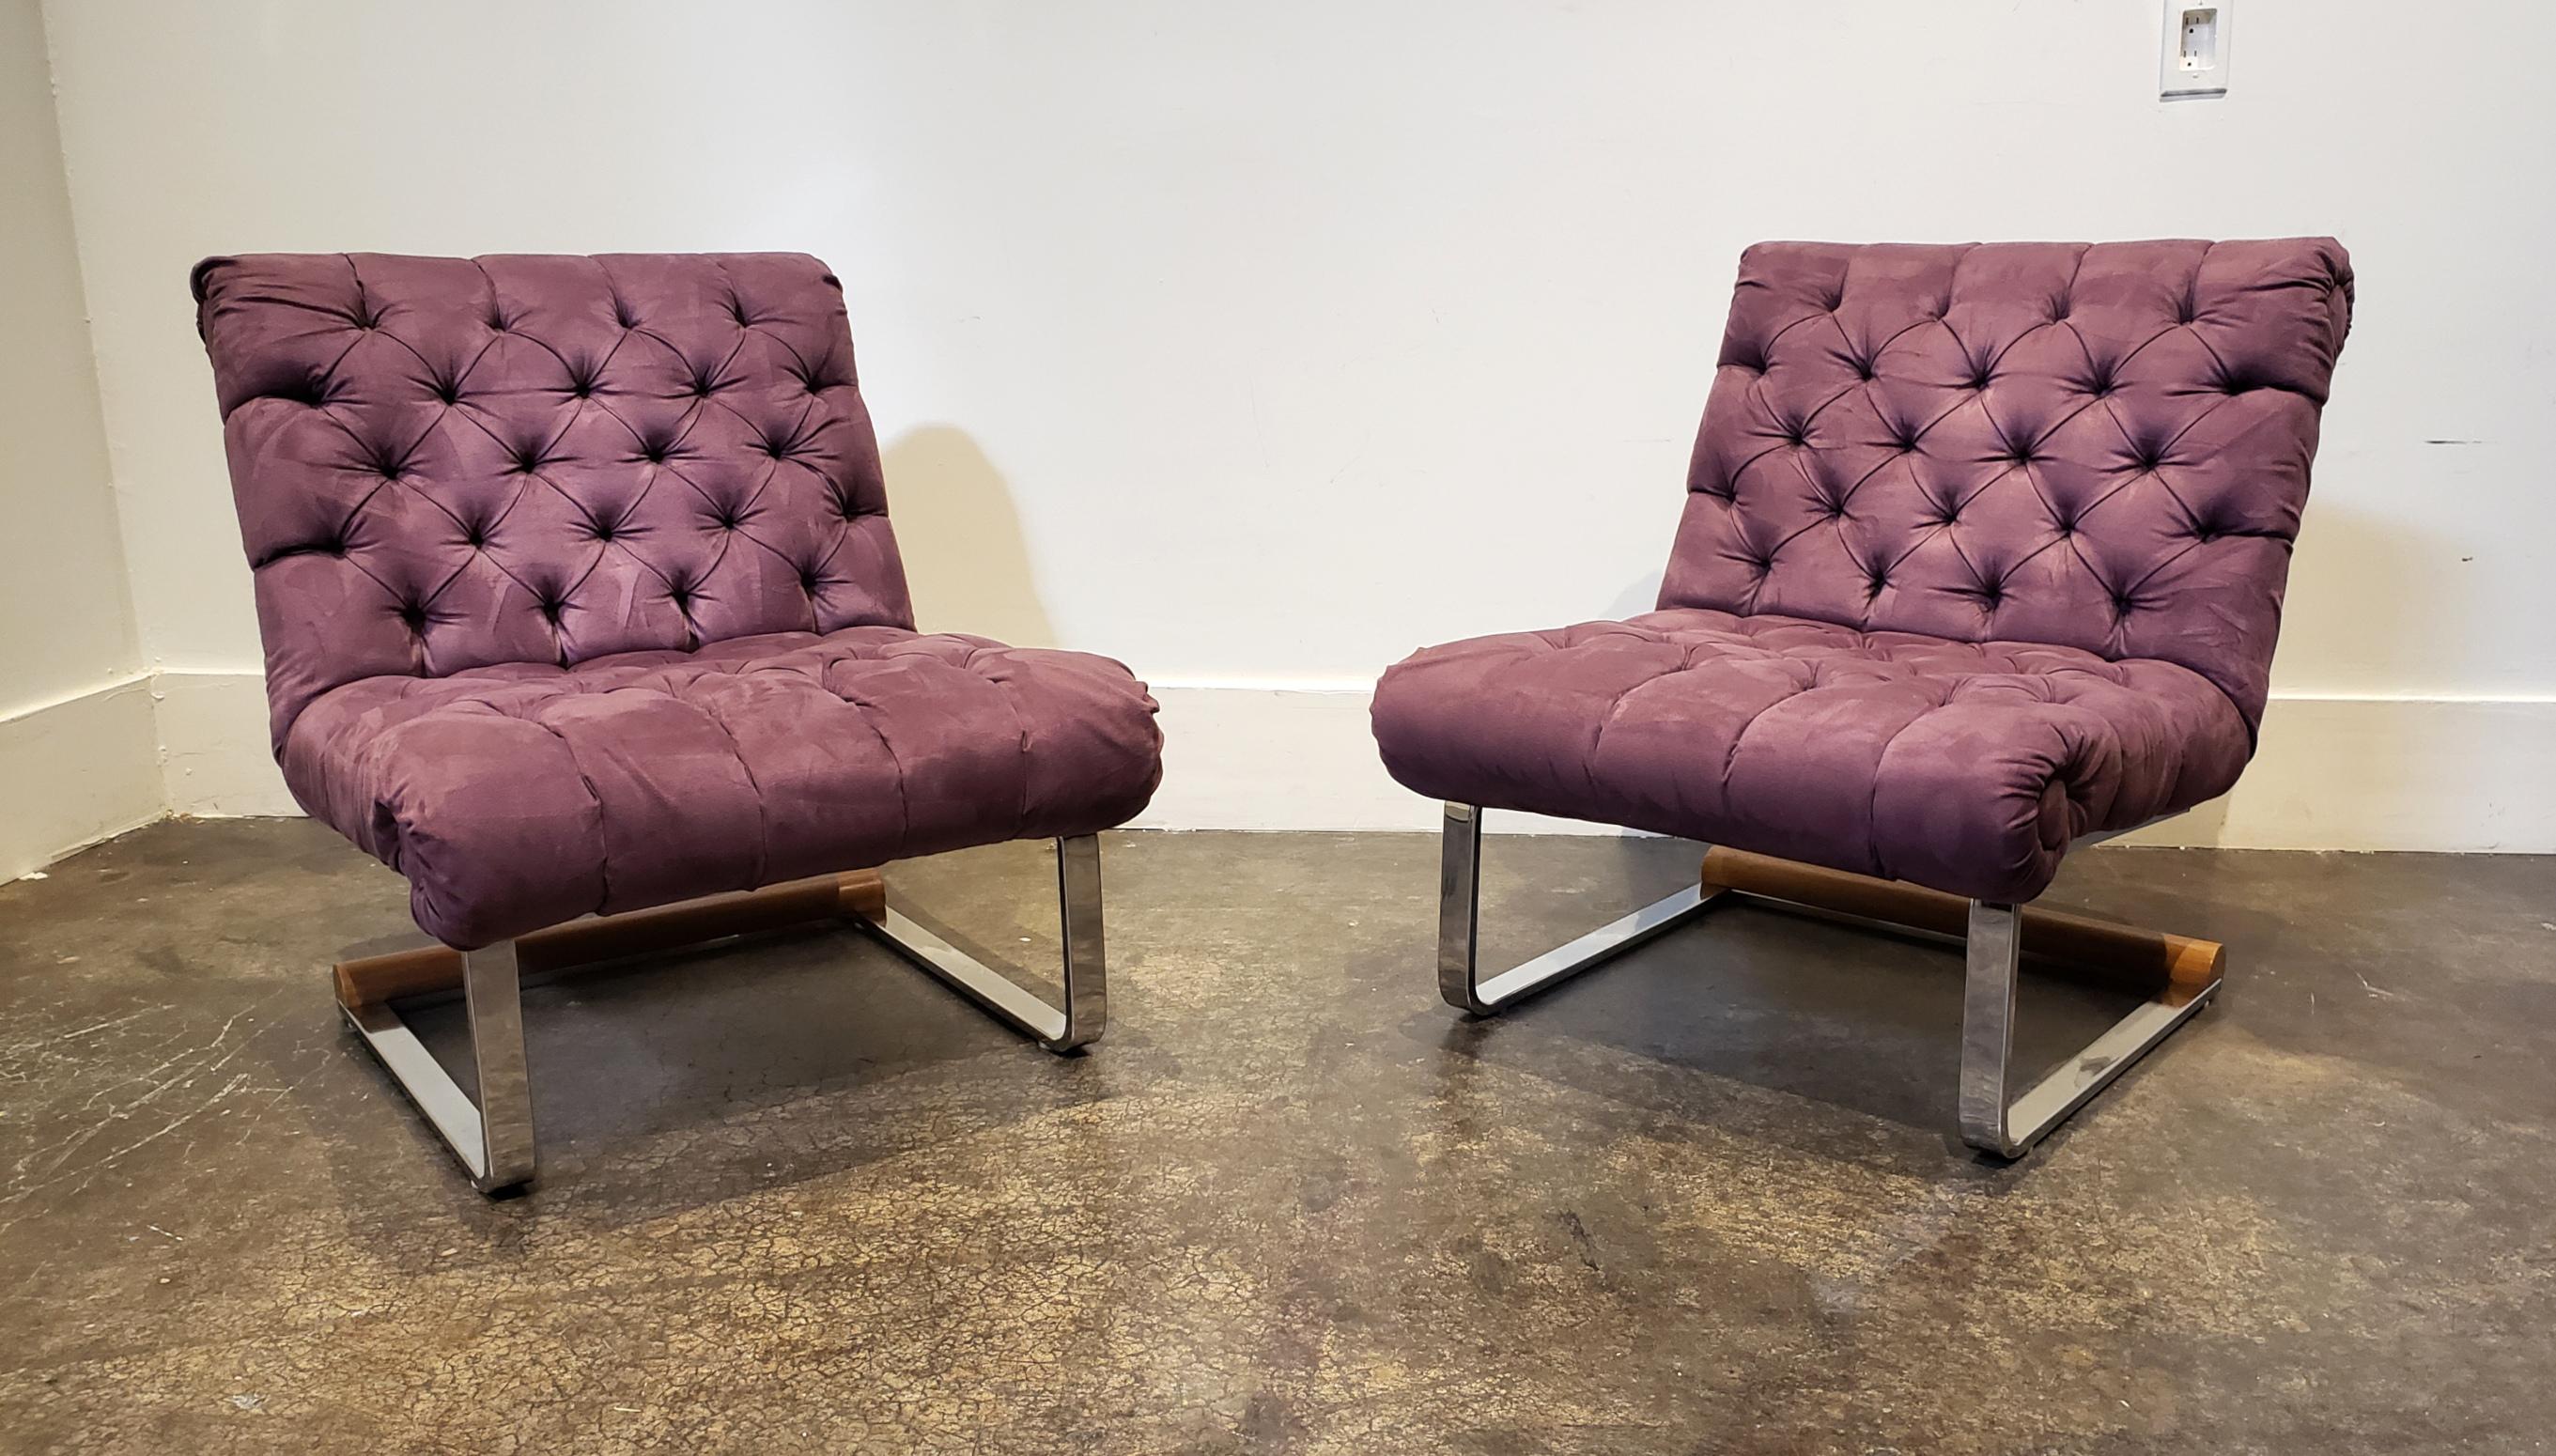 Baughman style slipper chairs with purple tufted micro-sued upholstery and chrome cantilevered base with wood accent.